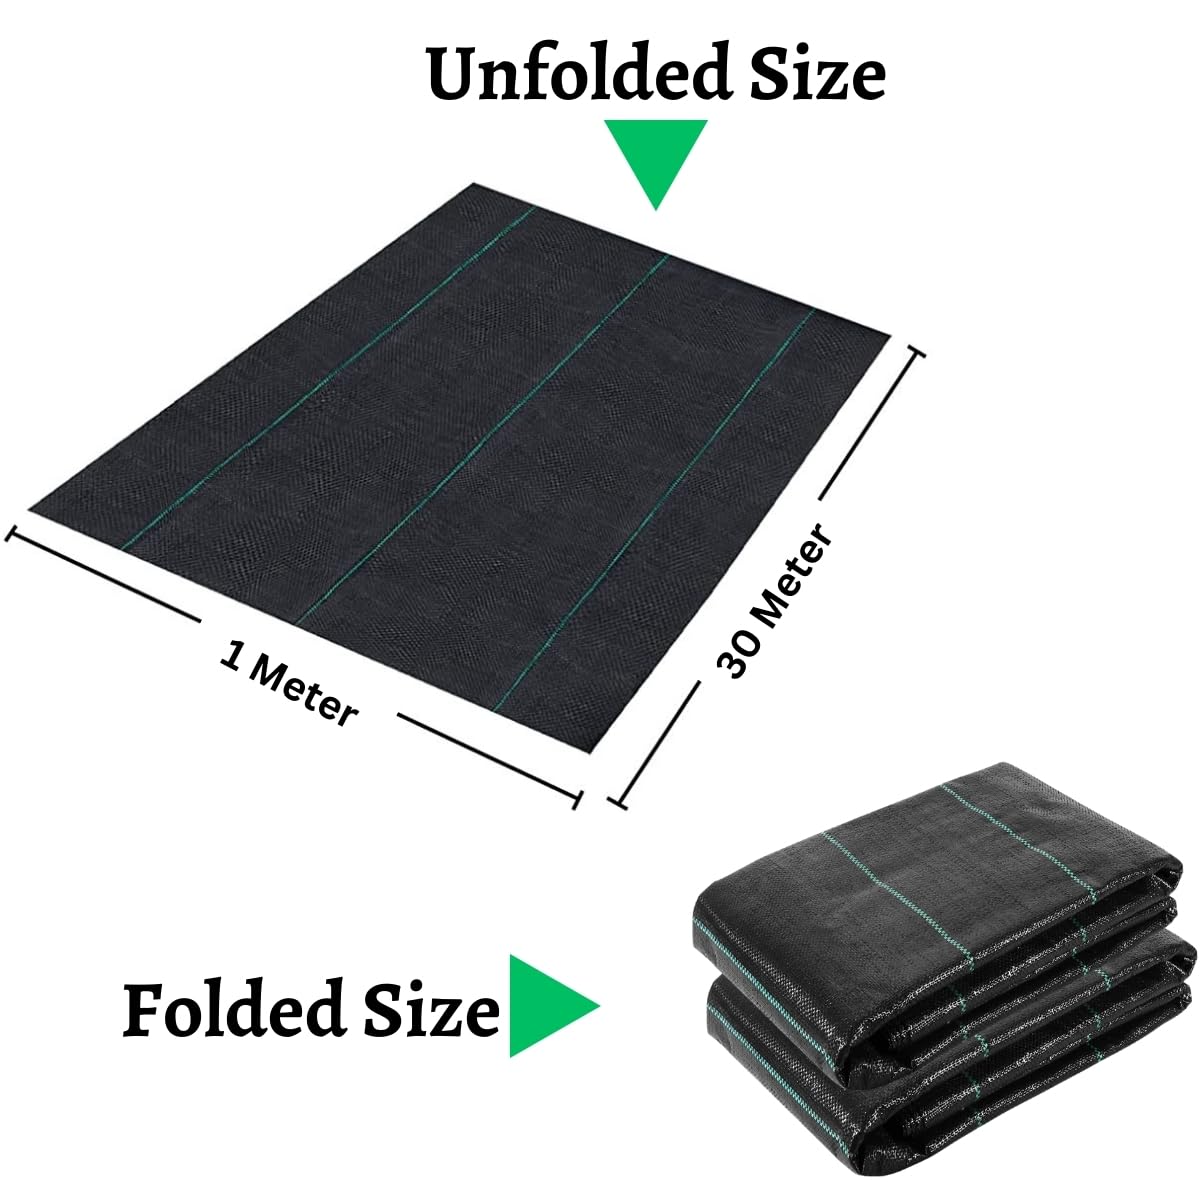 Singhal Premium Garden Weed Control Barrier Sheet Mat 1 Meter x 30 Meter, Landscape Fabric 110 GSM Heavy Duty Weed Block Gardening Mat for Gardens, Agriculture, Outdoor Projects (Black)